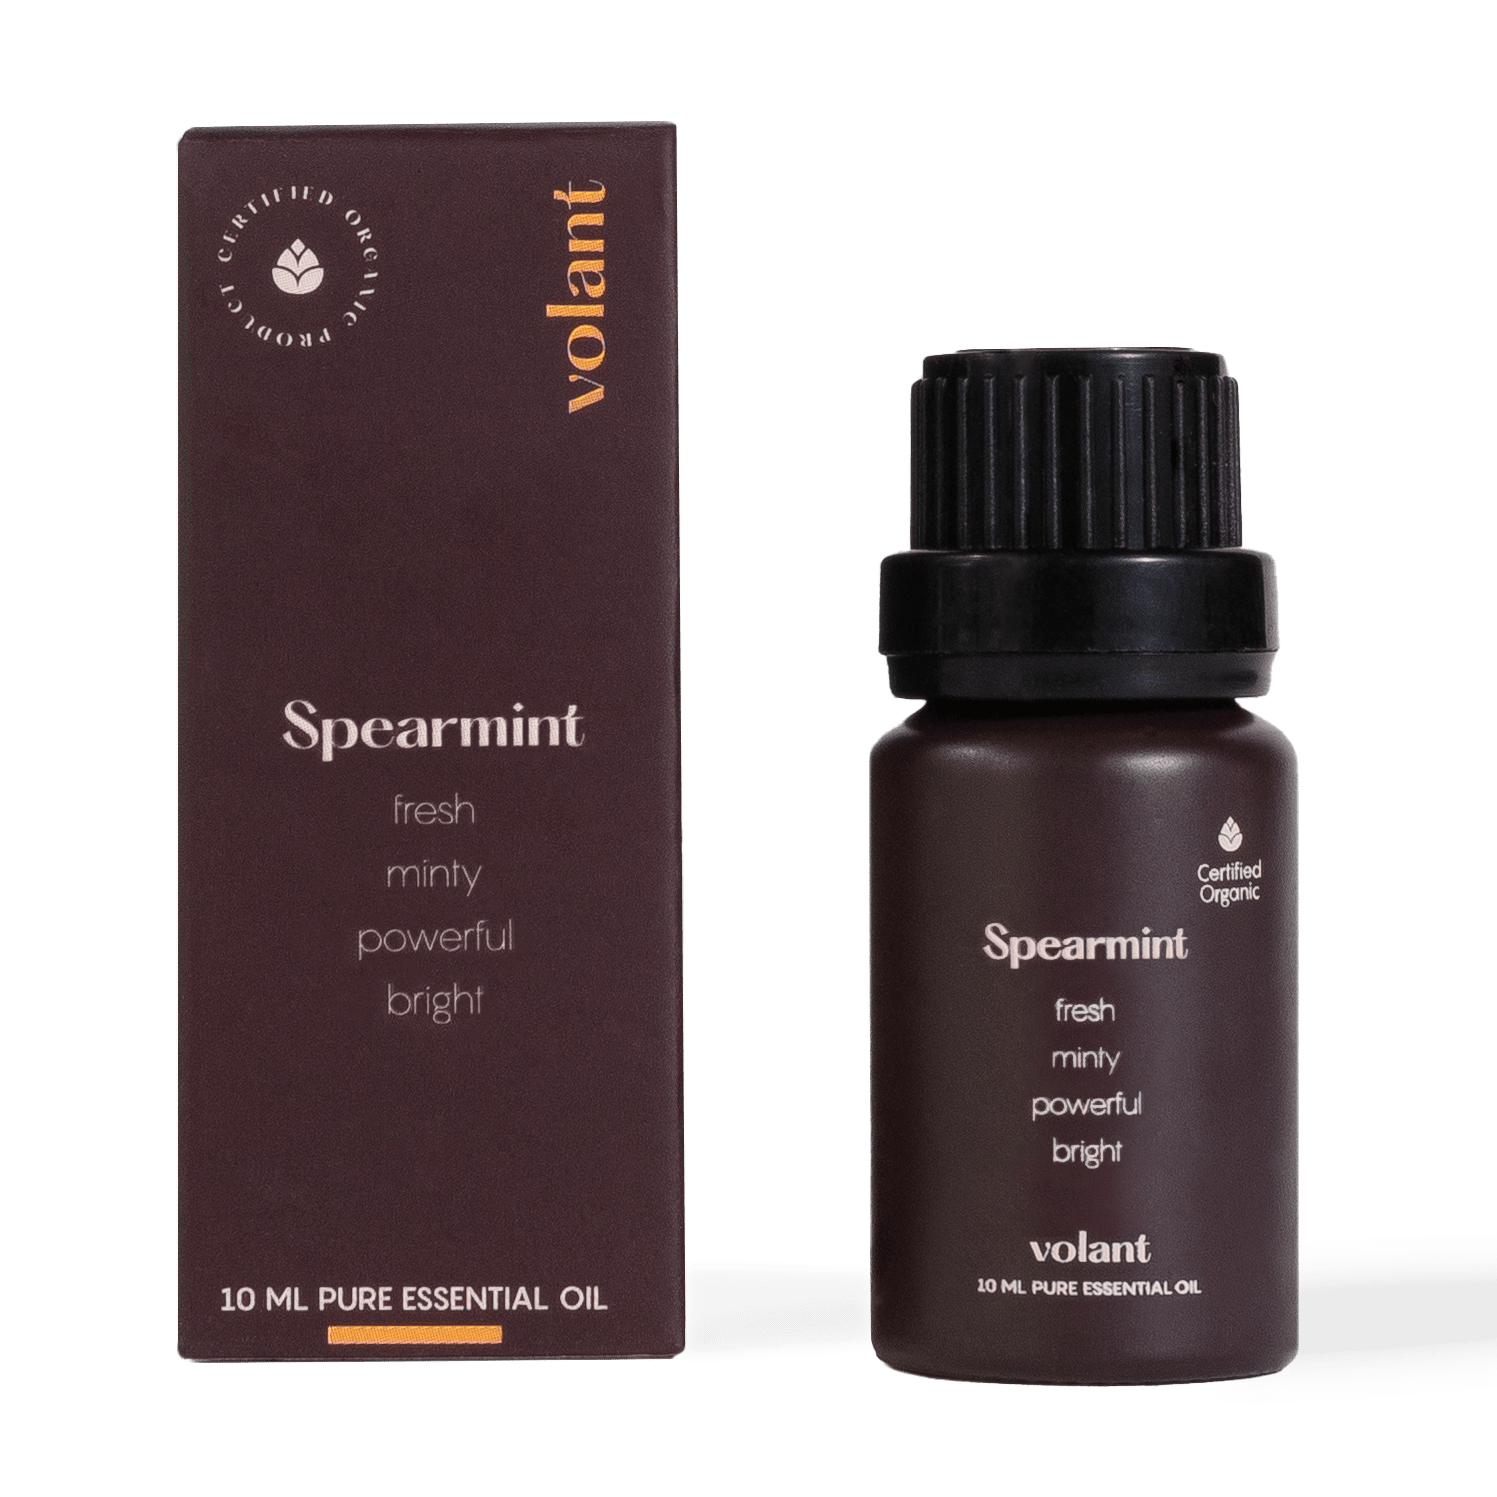 volant organic spearmint essential oil bottle packaging for ailments such as skin problems, headaches, nausea, vomiting, respiratory issues, and cold symptoms